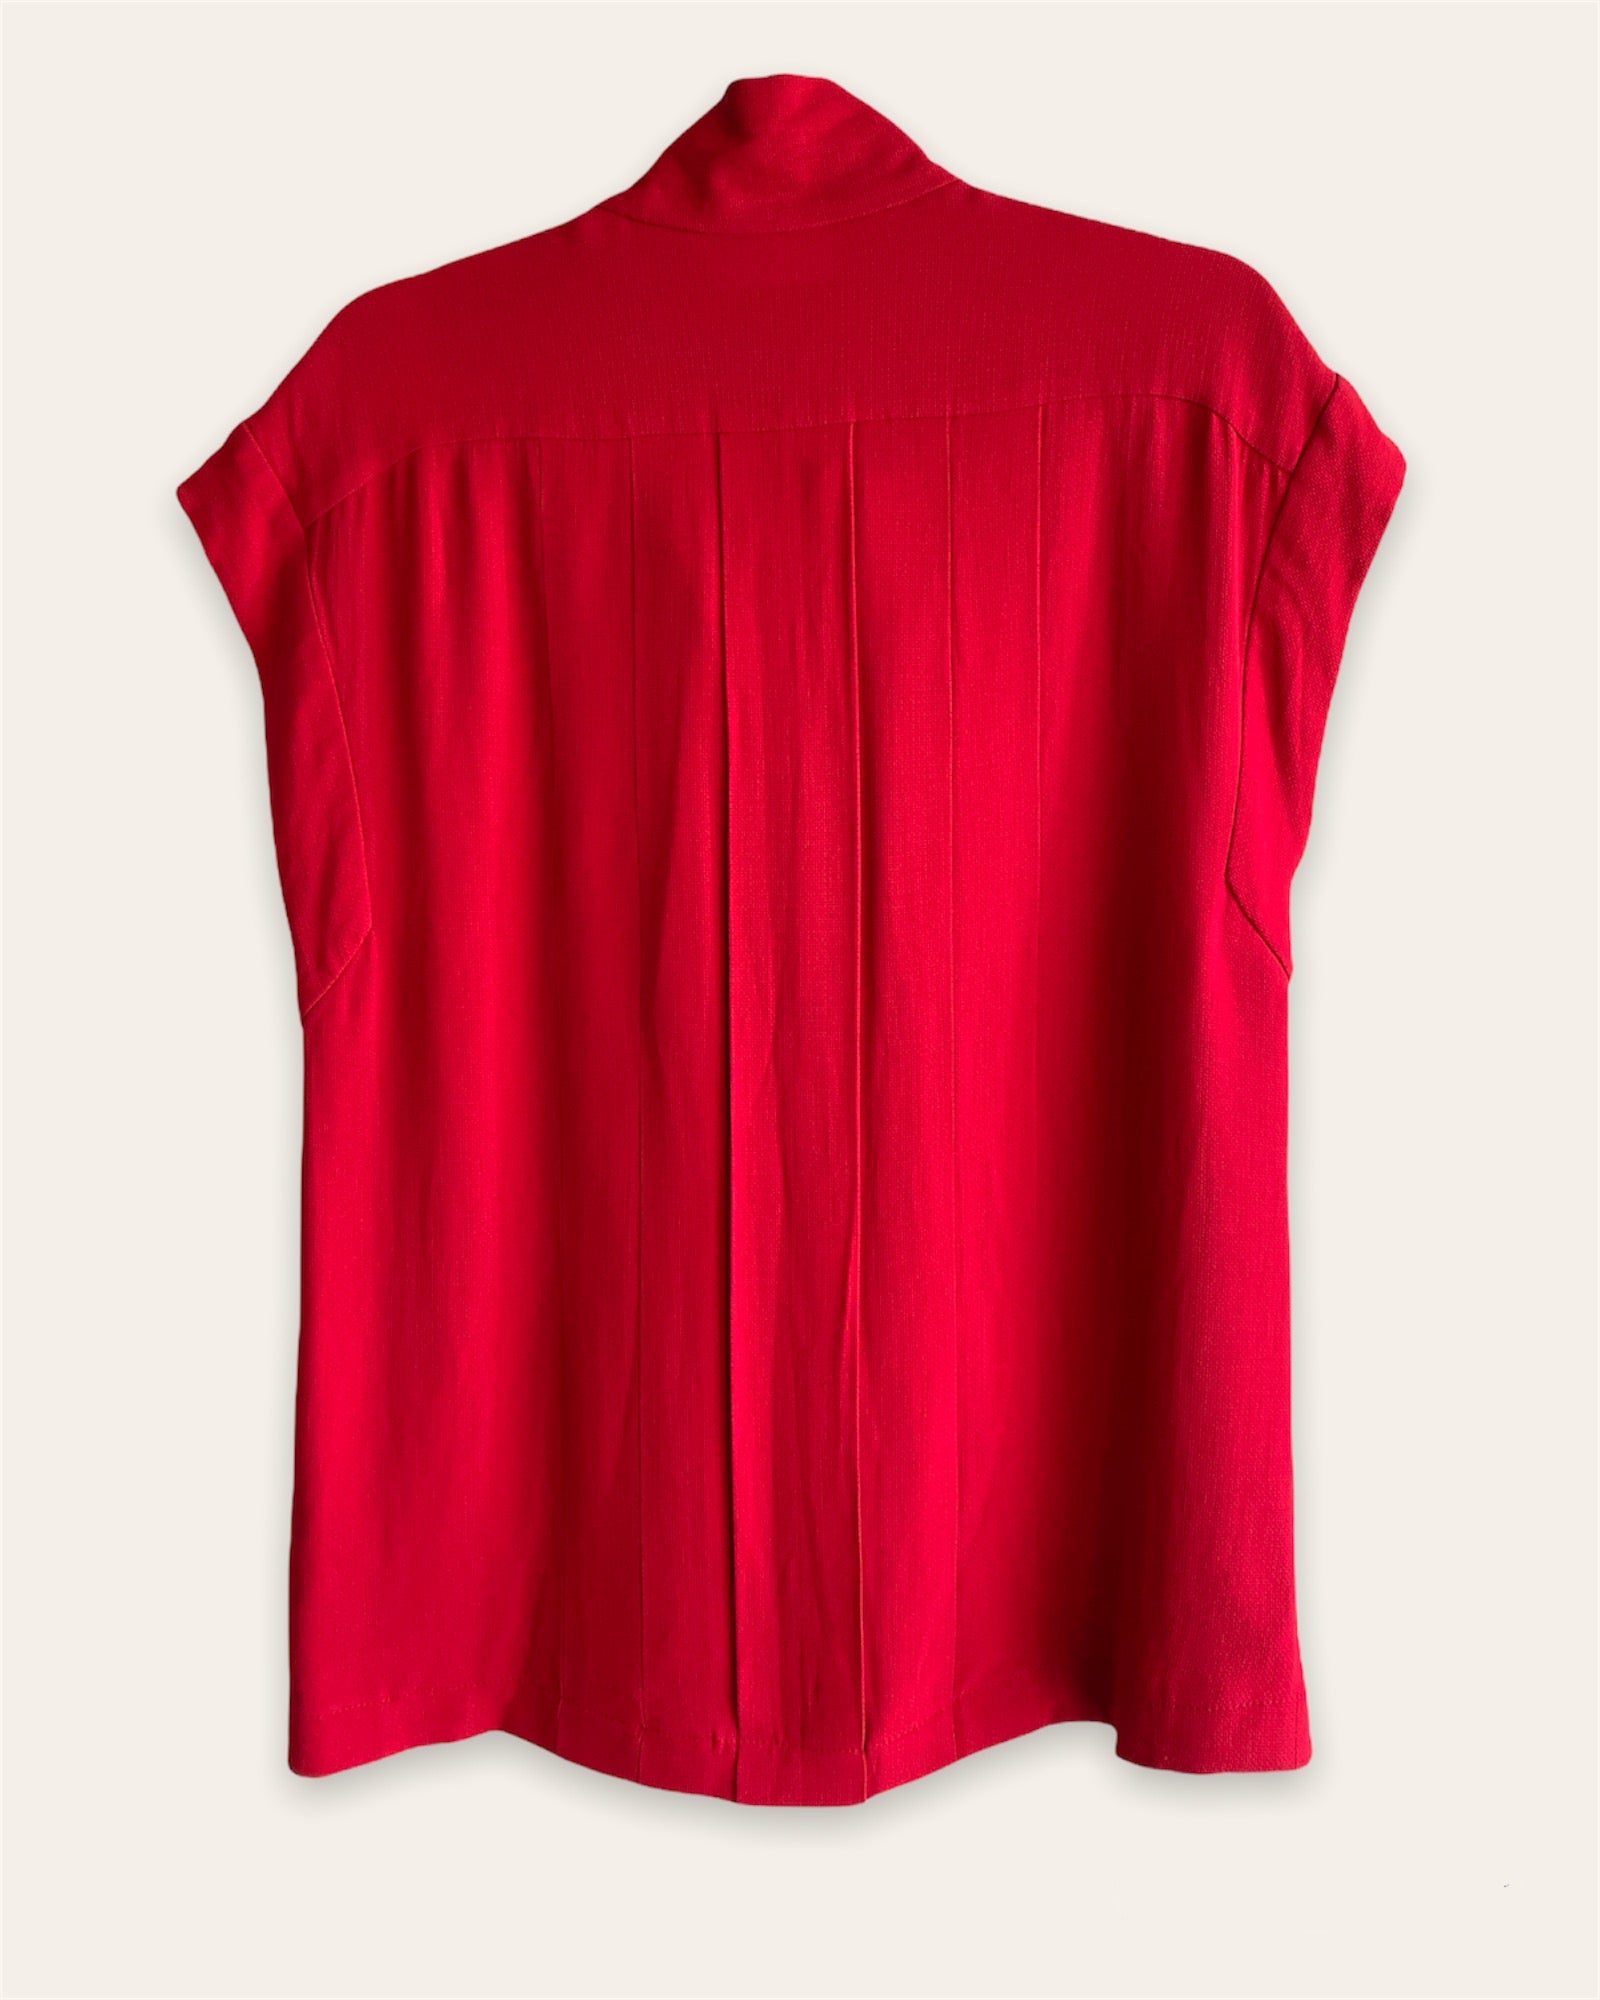 Chanel Red Blouse